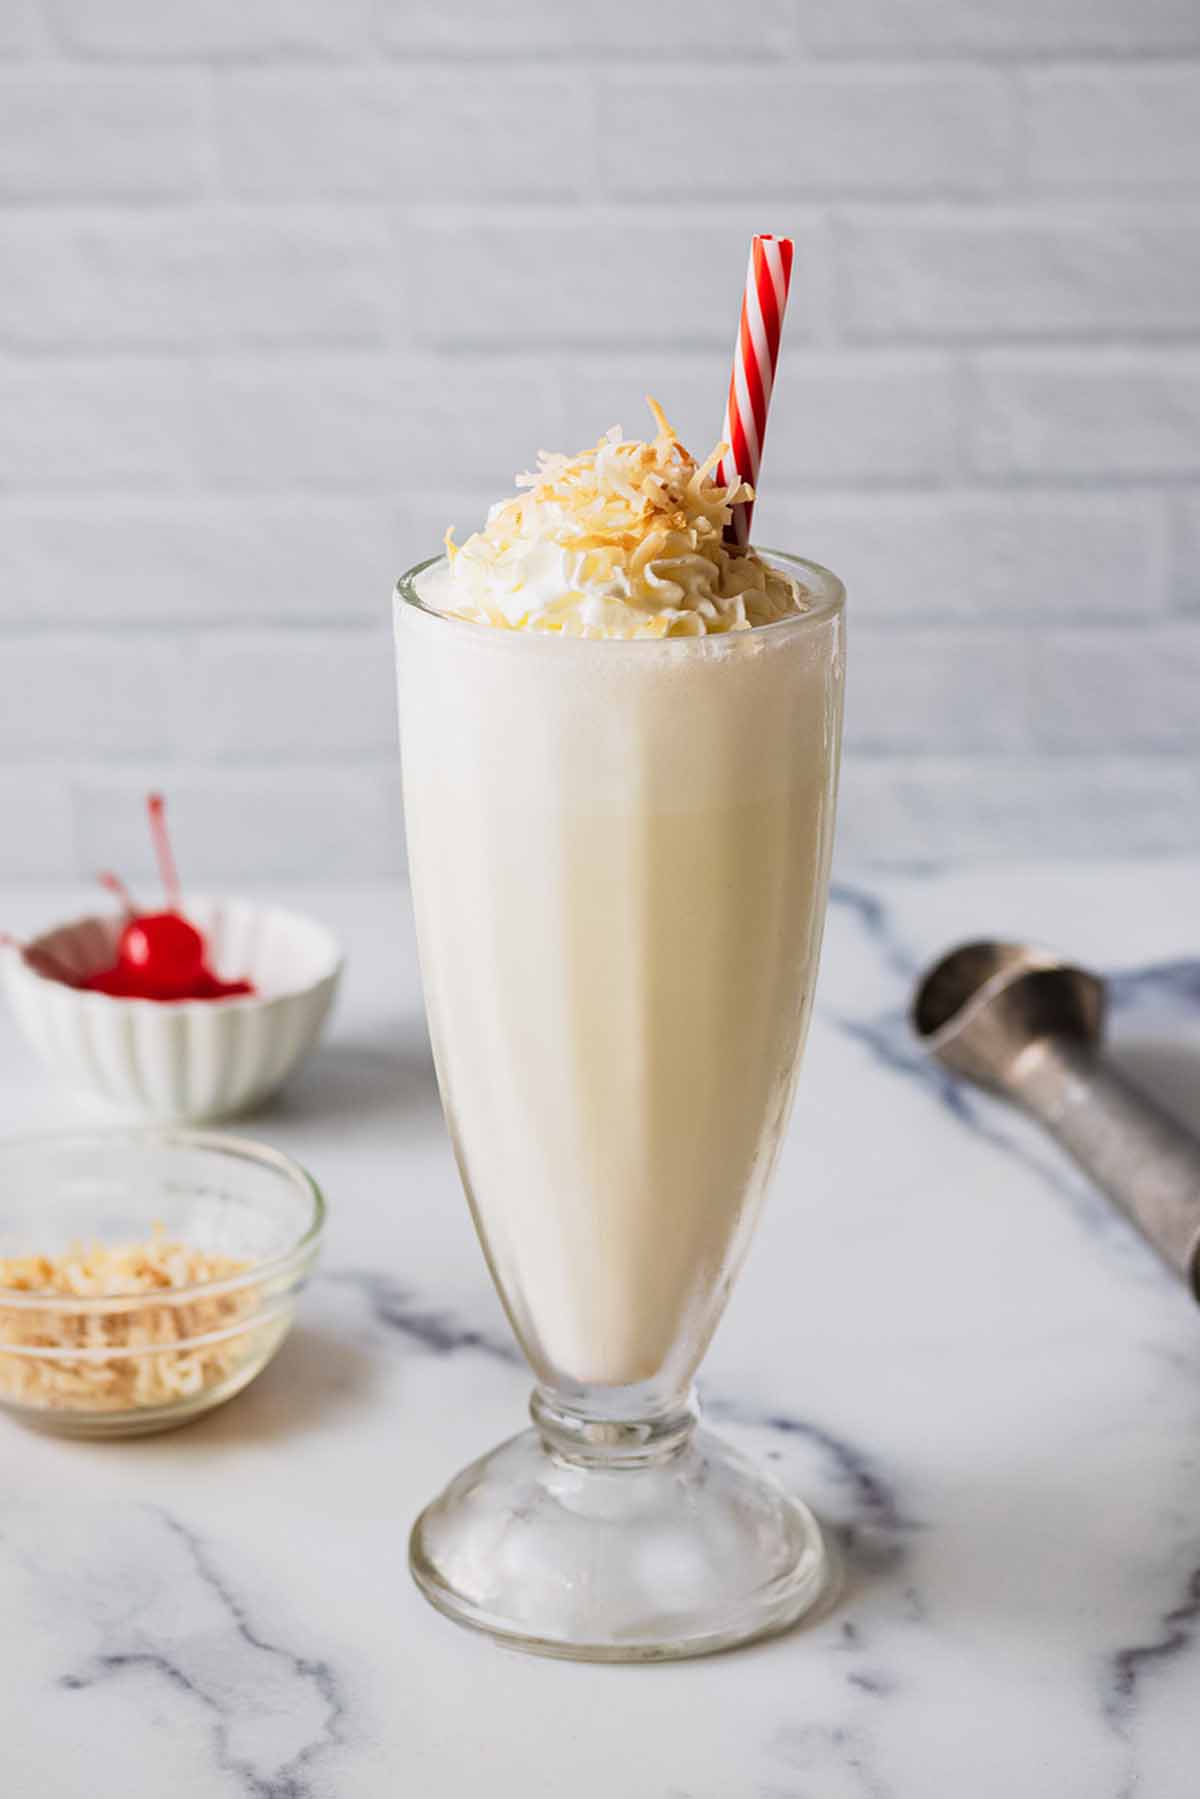 Coconut shake topped with whipped cream, and toasted coconut in a tall glass with a red and white straw